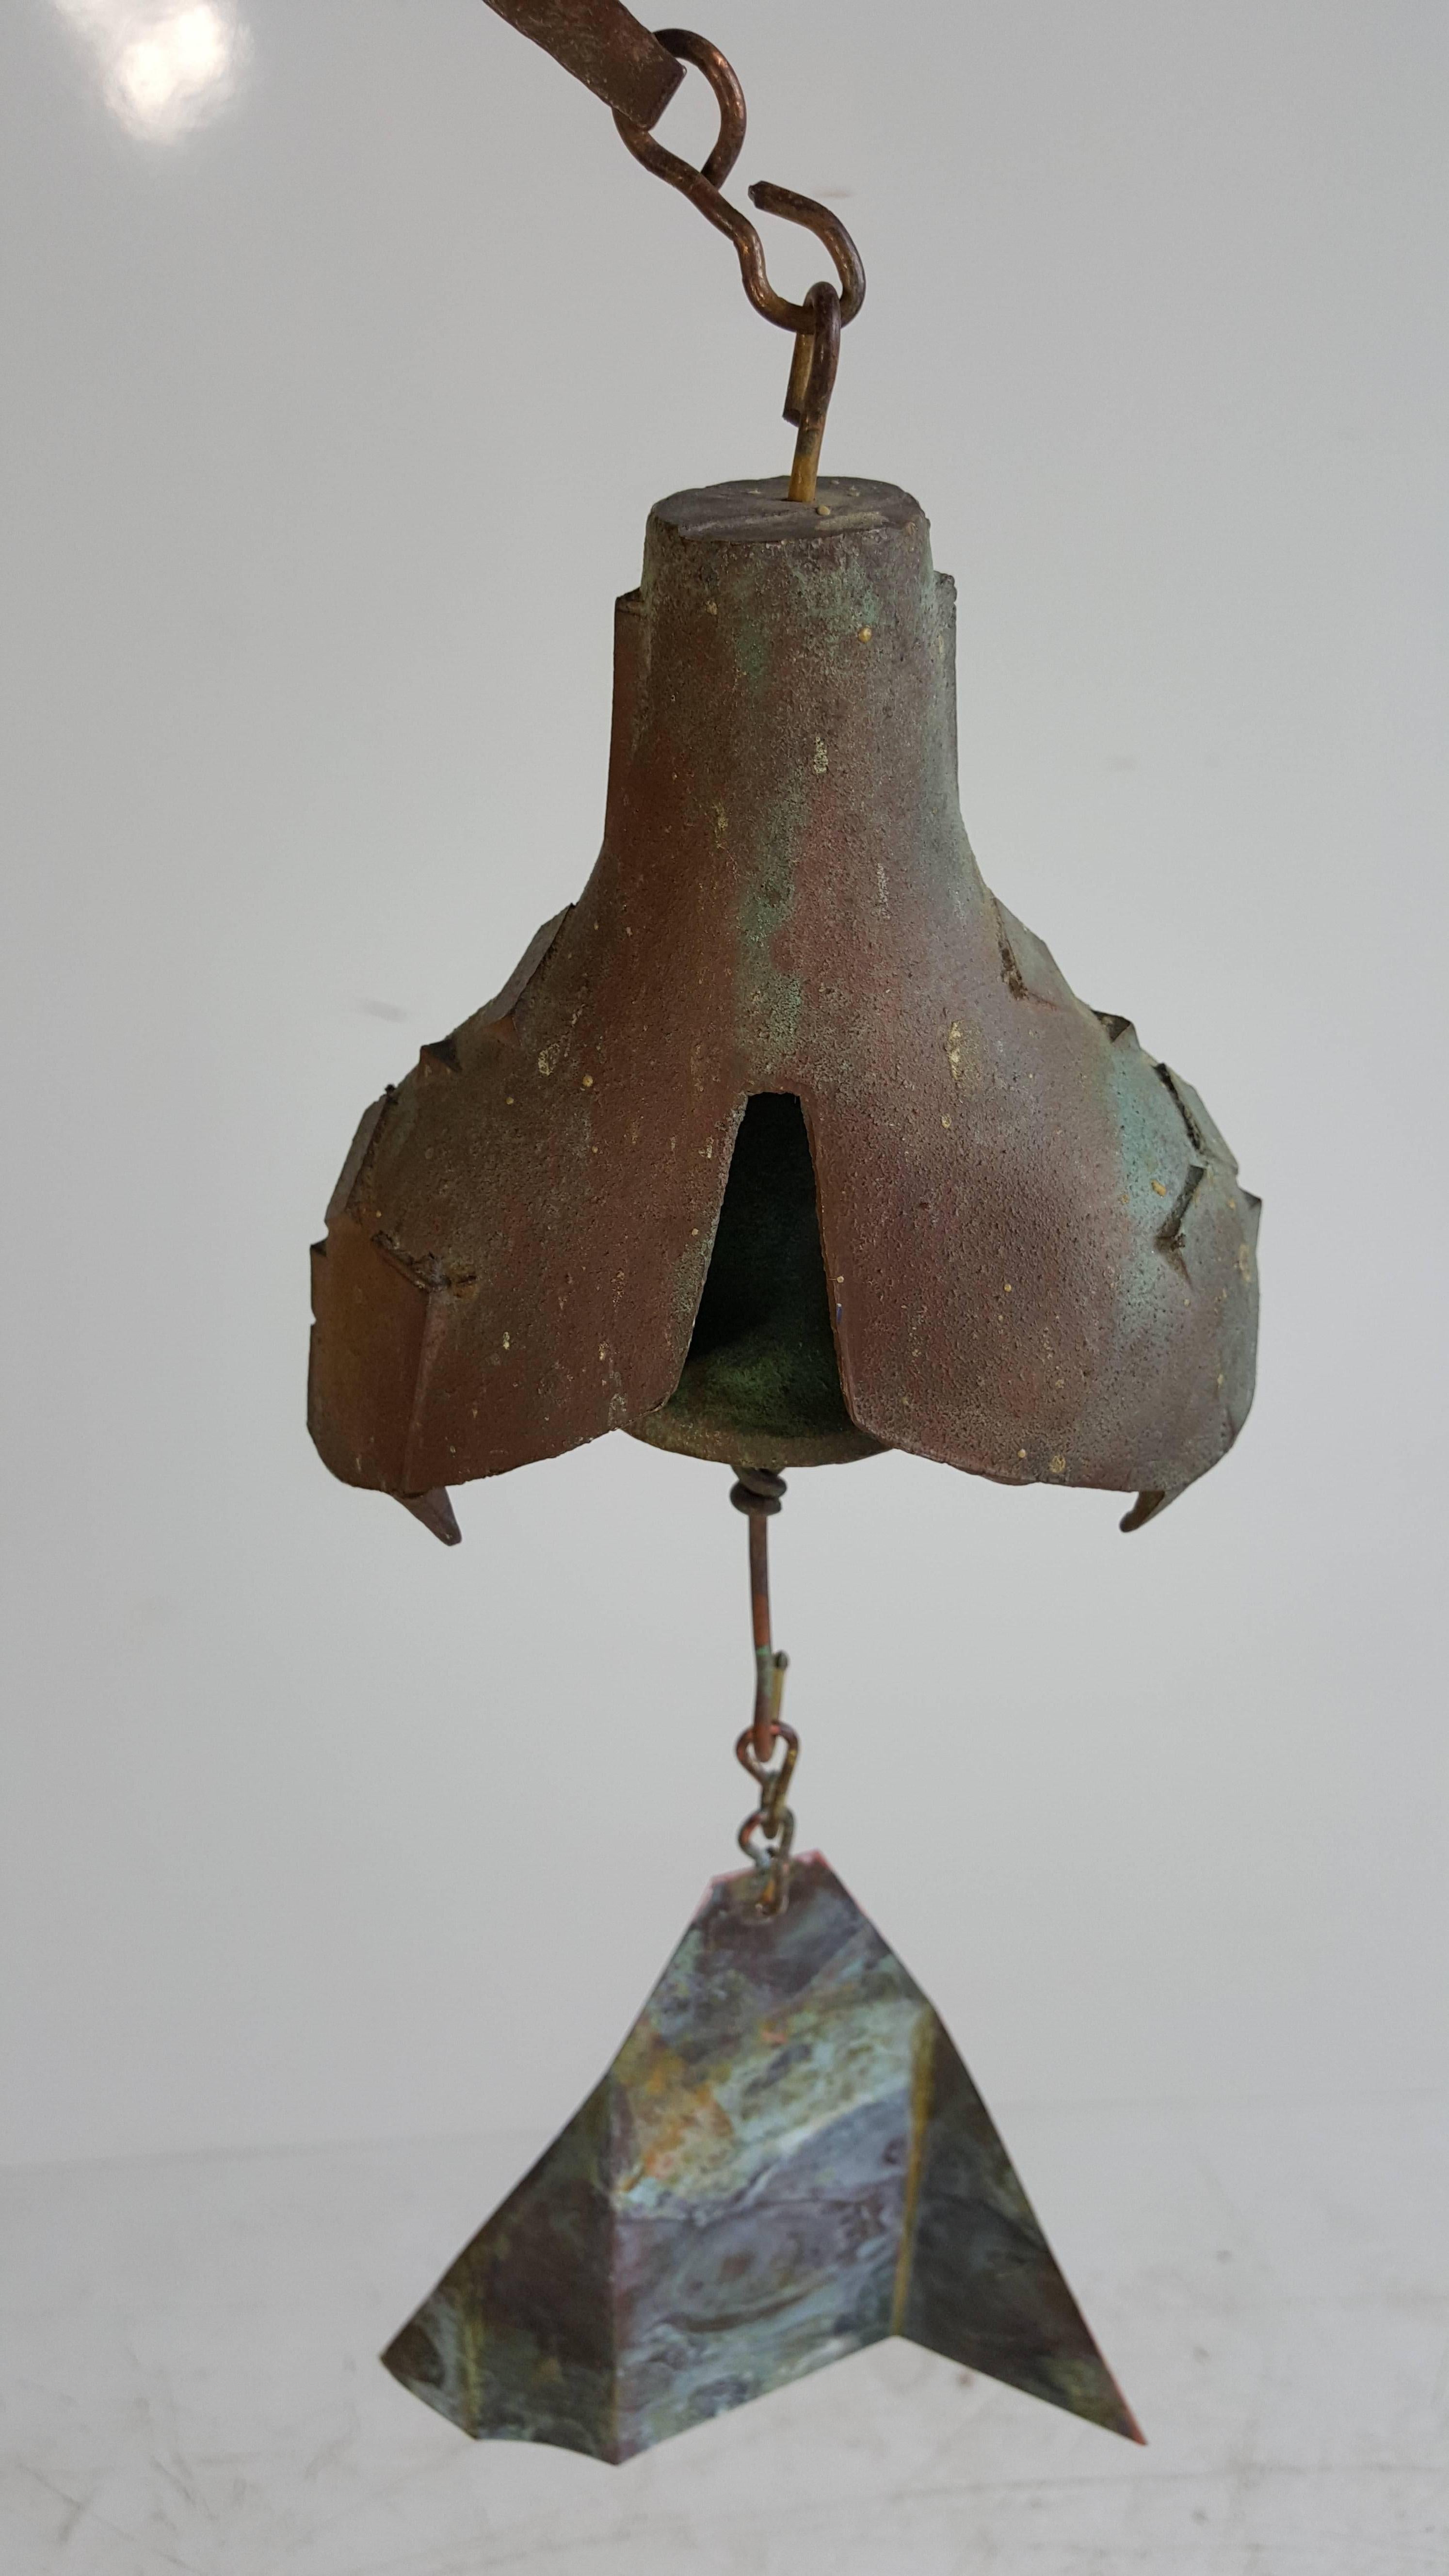 Wind chime bell, solid cast bronze, heavily patinated surface signed with Arcosanti square emblem Arizona, 1970s.